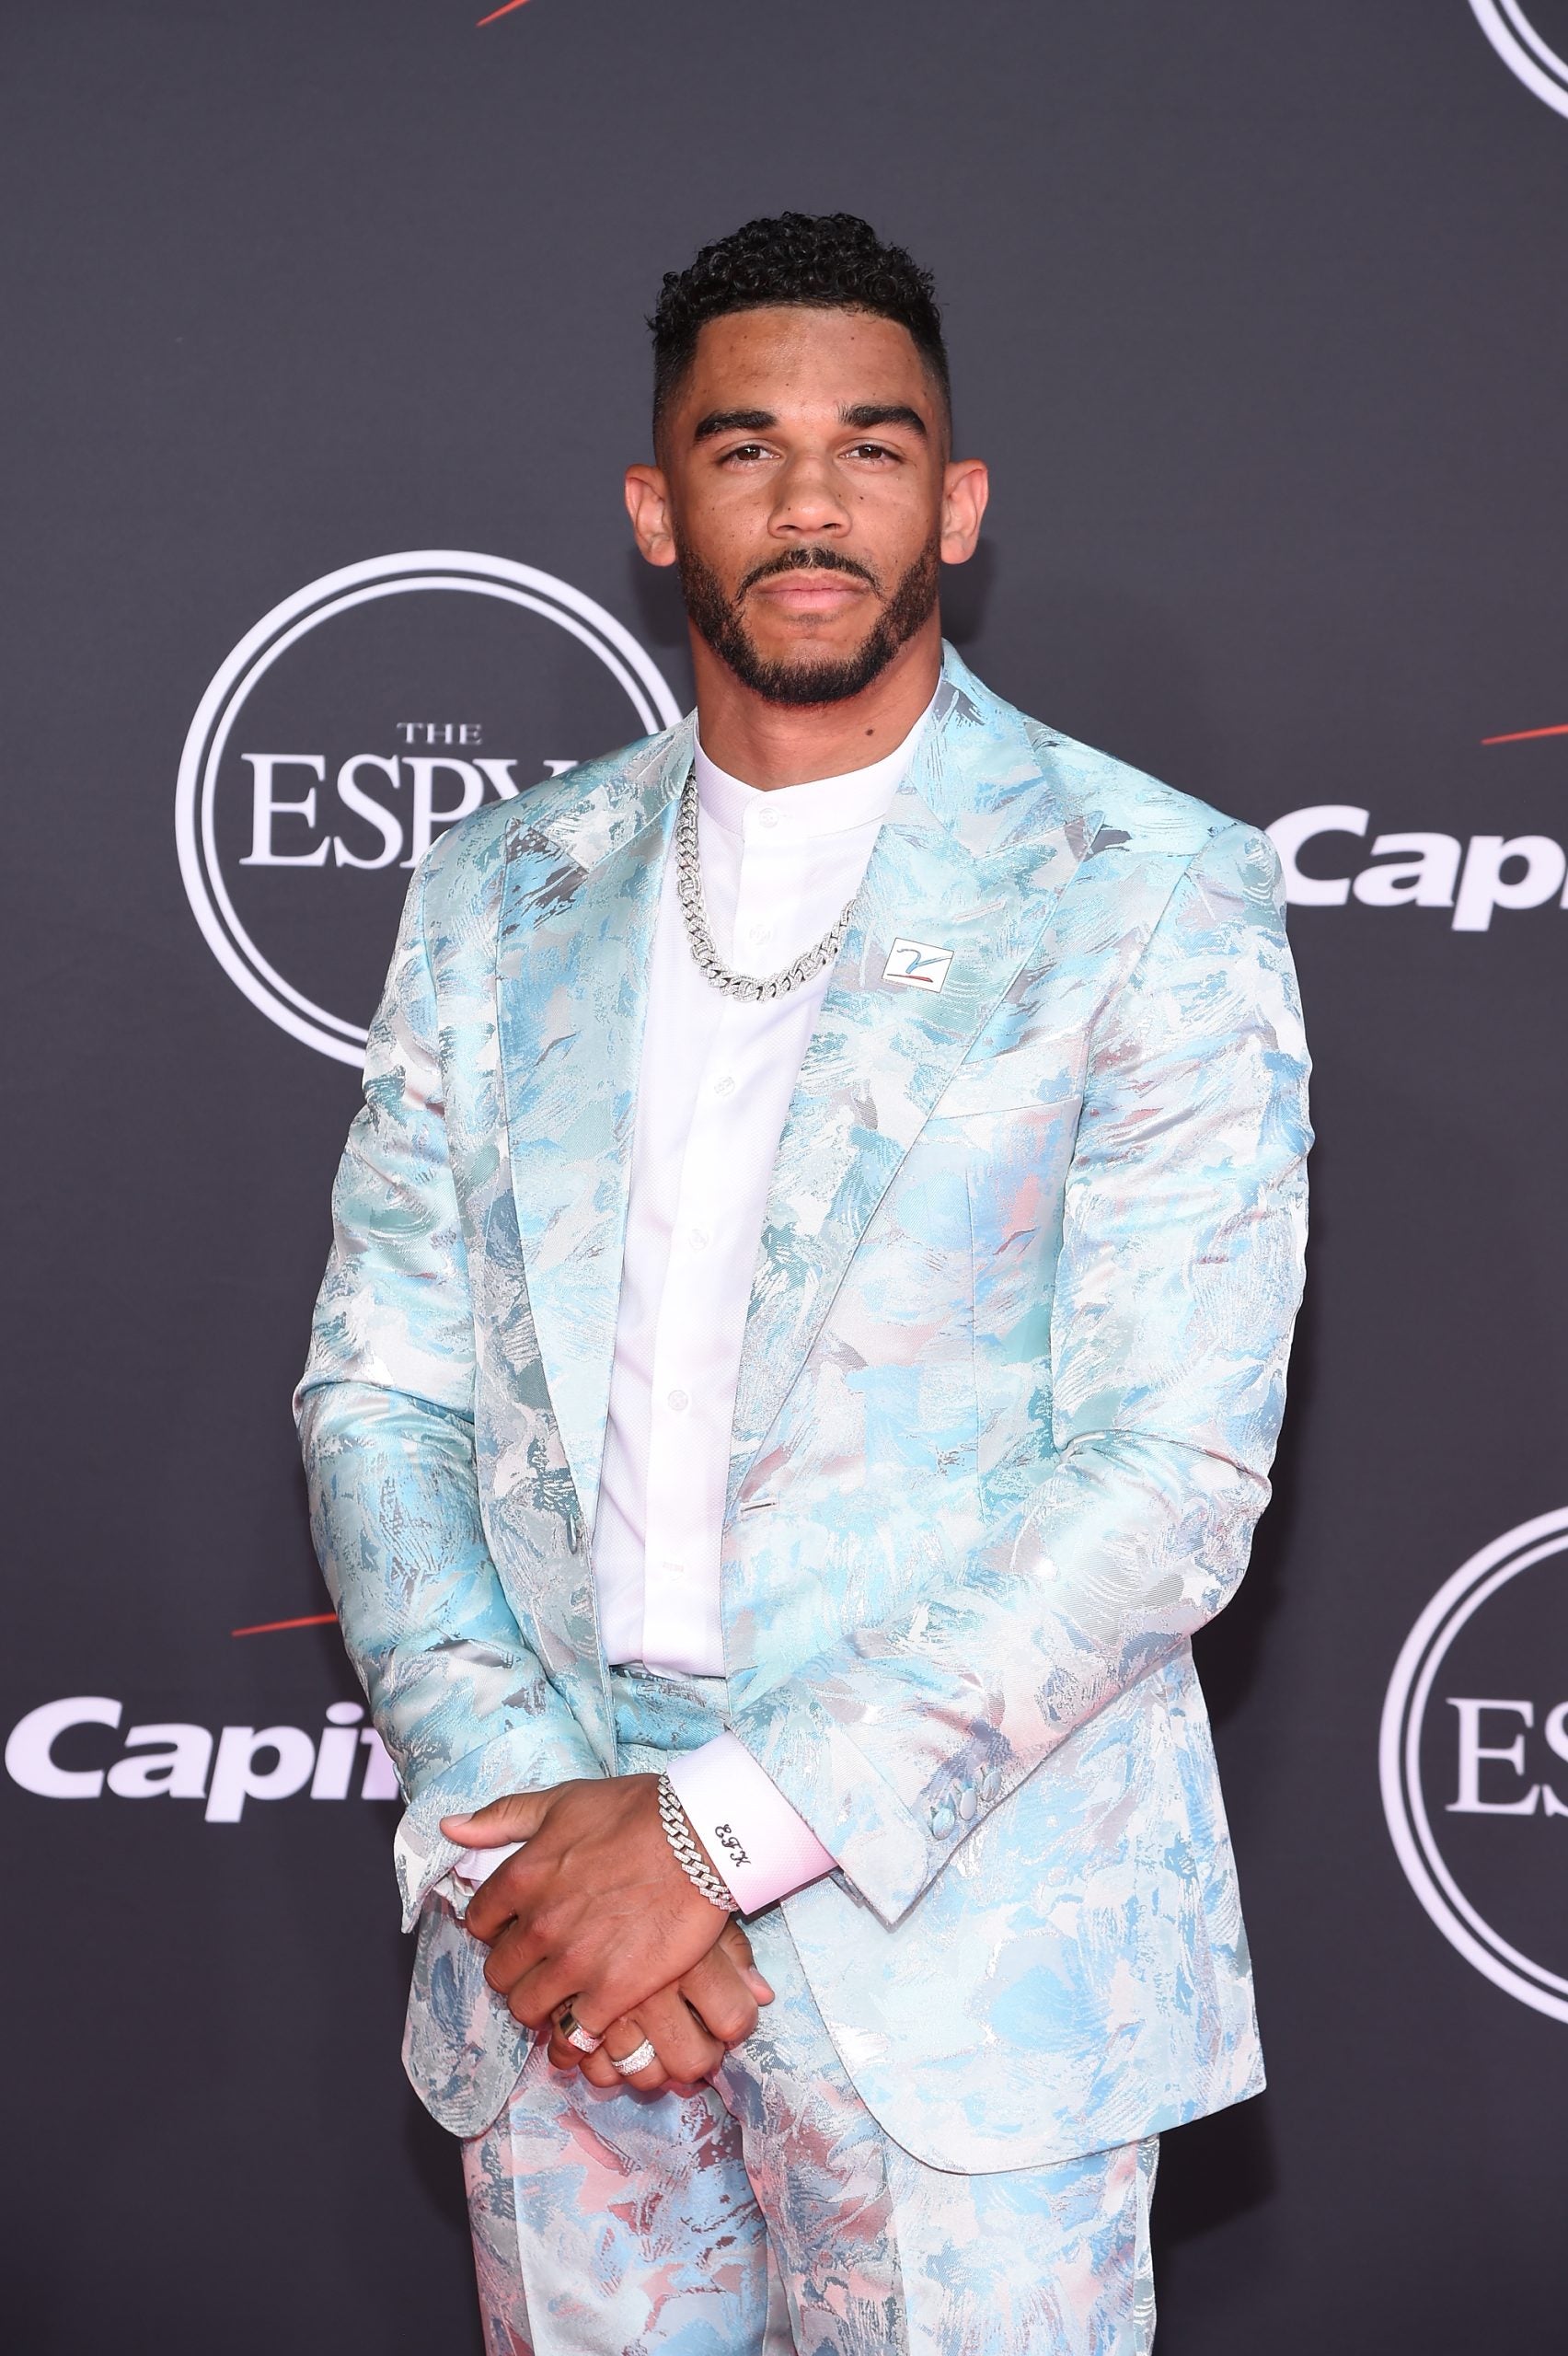 Here’s Who The Pros Say Are The Best-Dressed Athletes In Their League